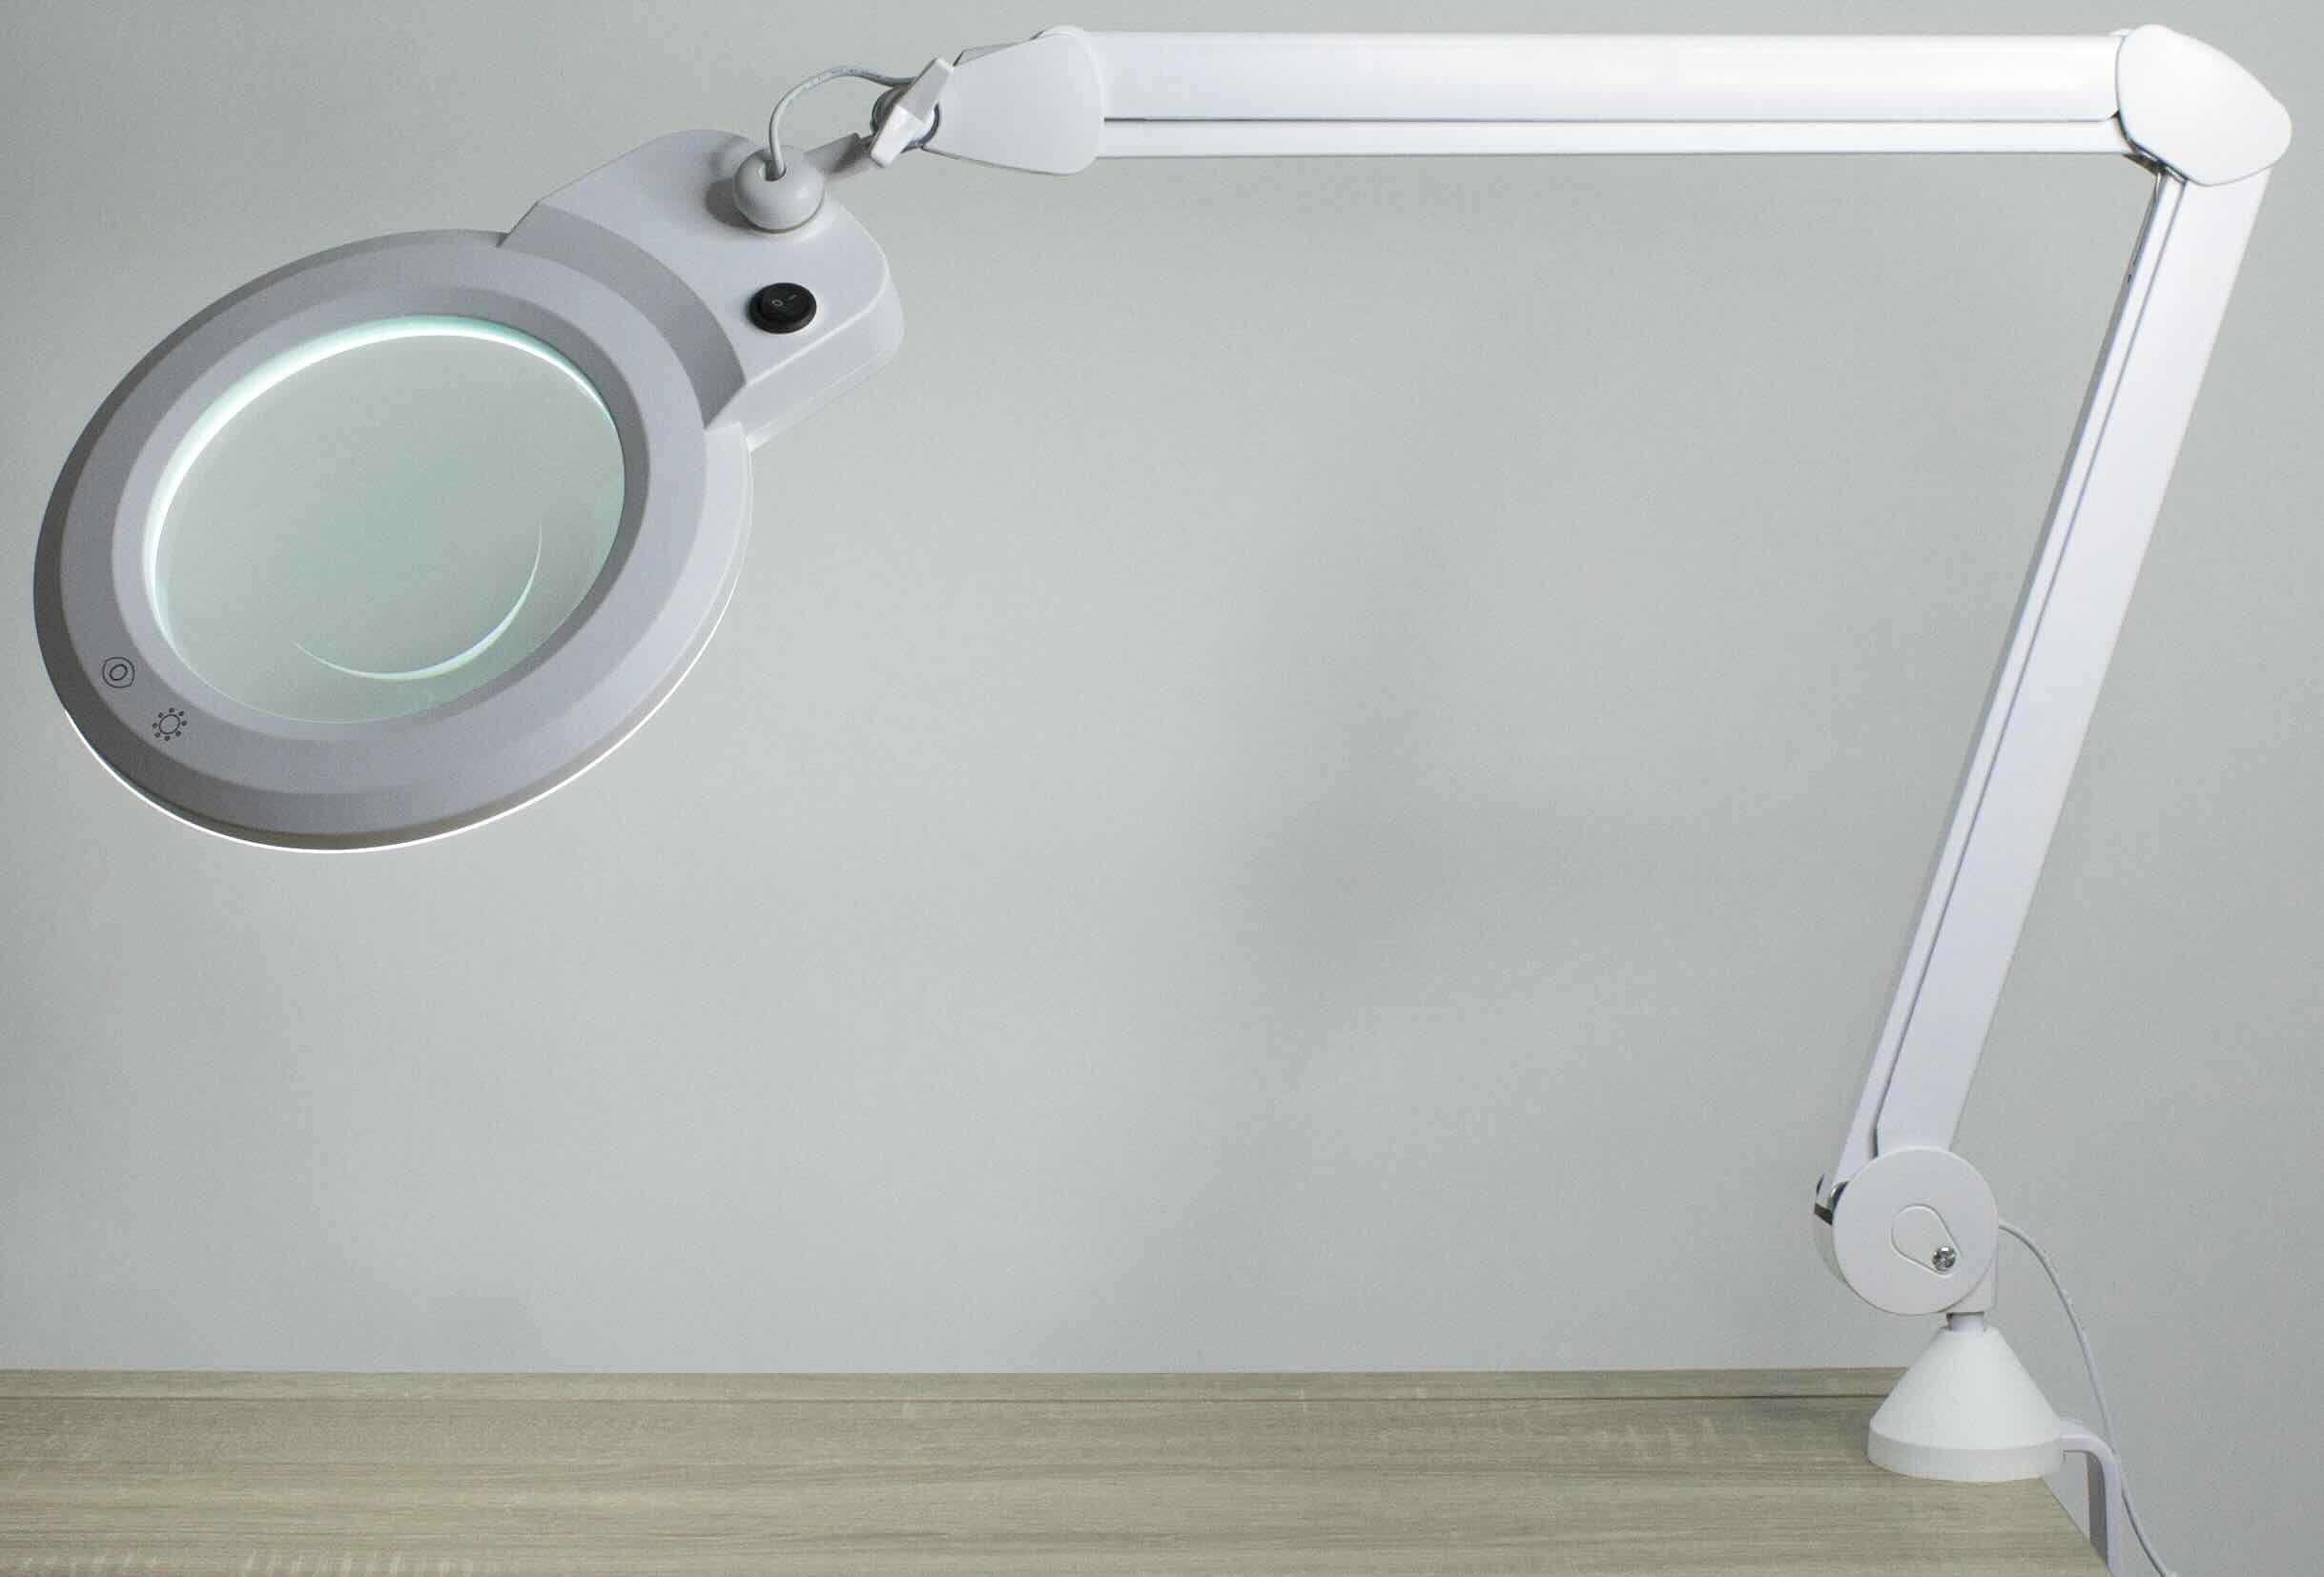 What Is The Most Common Magnifying Lamp Magnification?